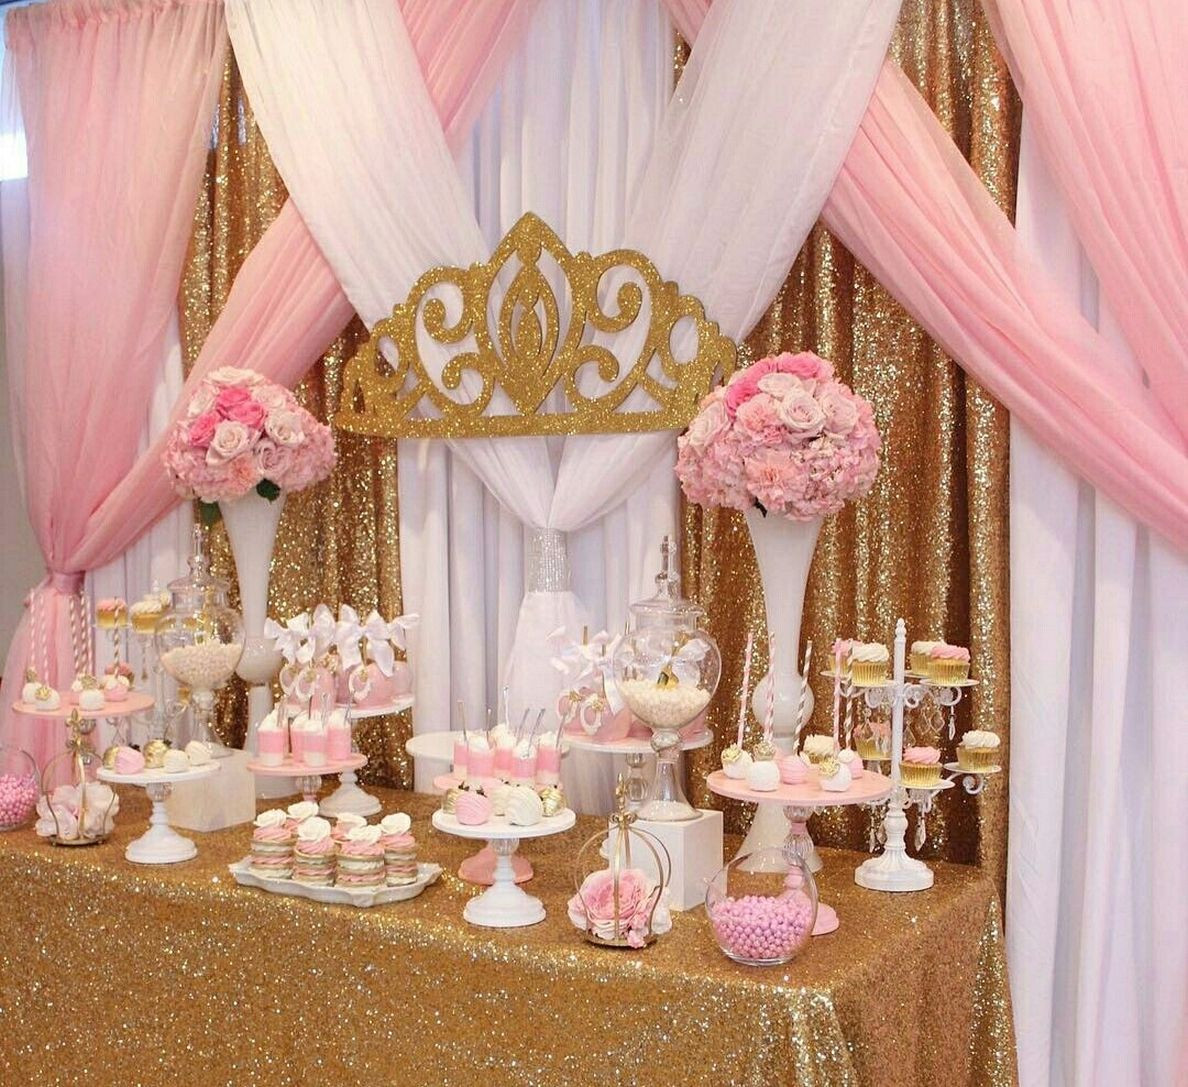 15 Birthday Party Ideas
 Best 100 Quince Decorations Ideas for Your Party